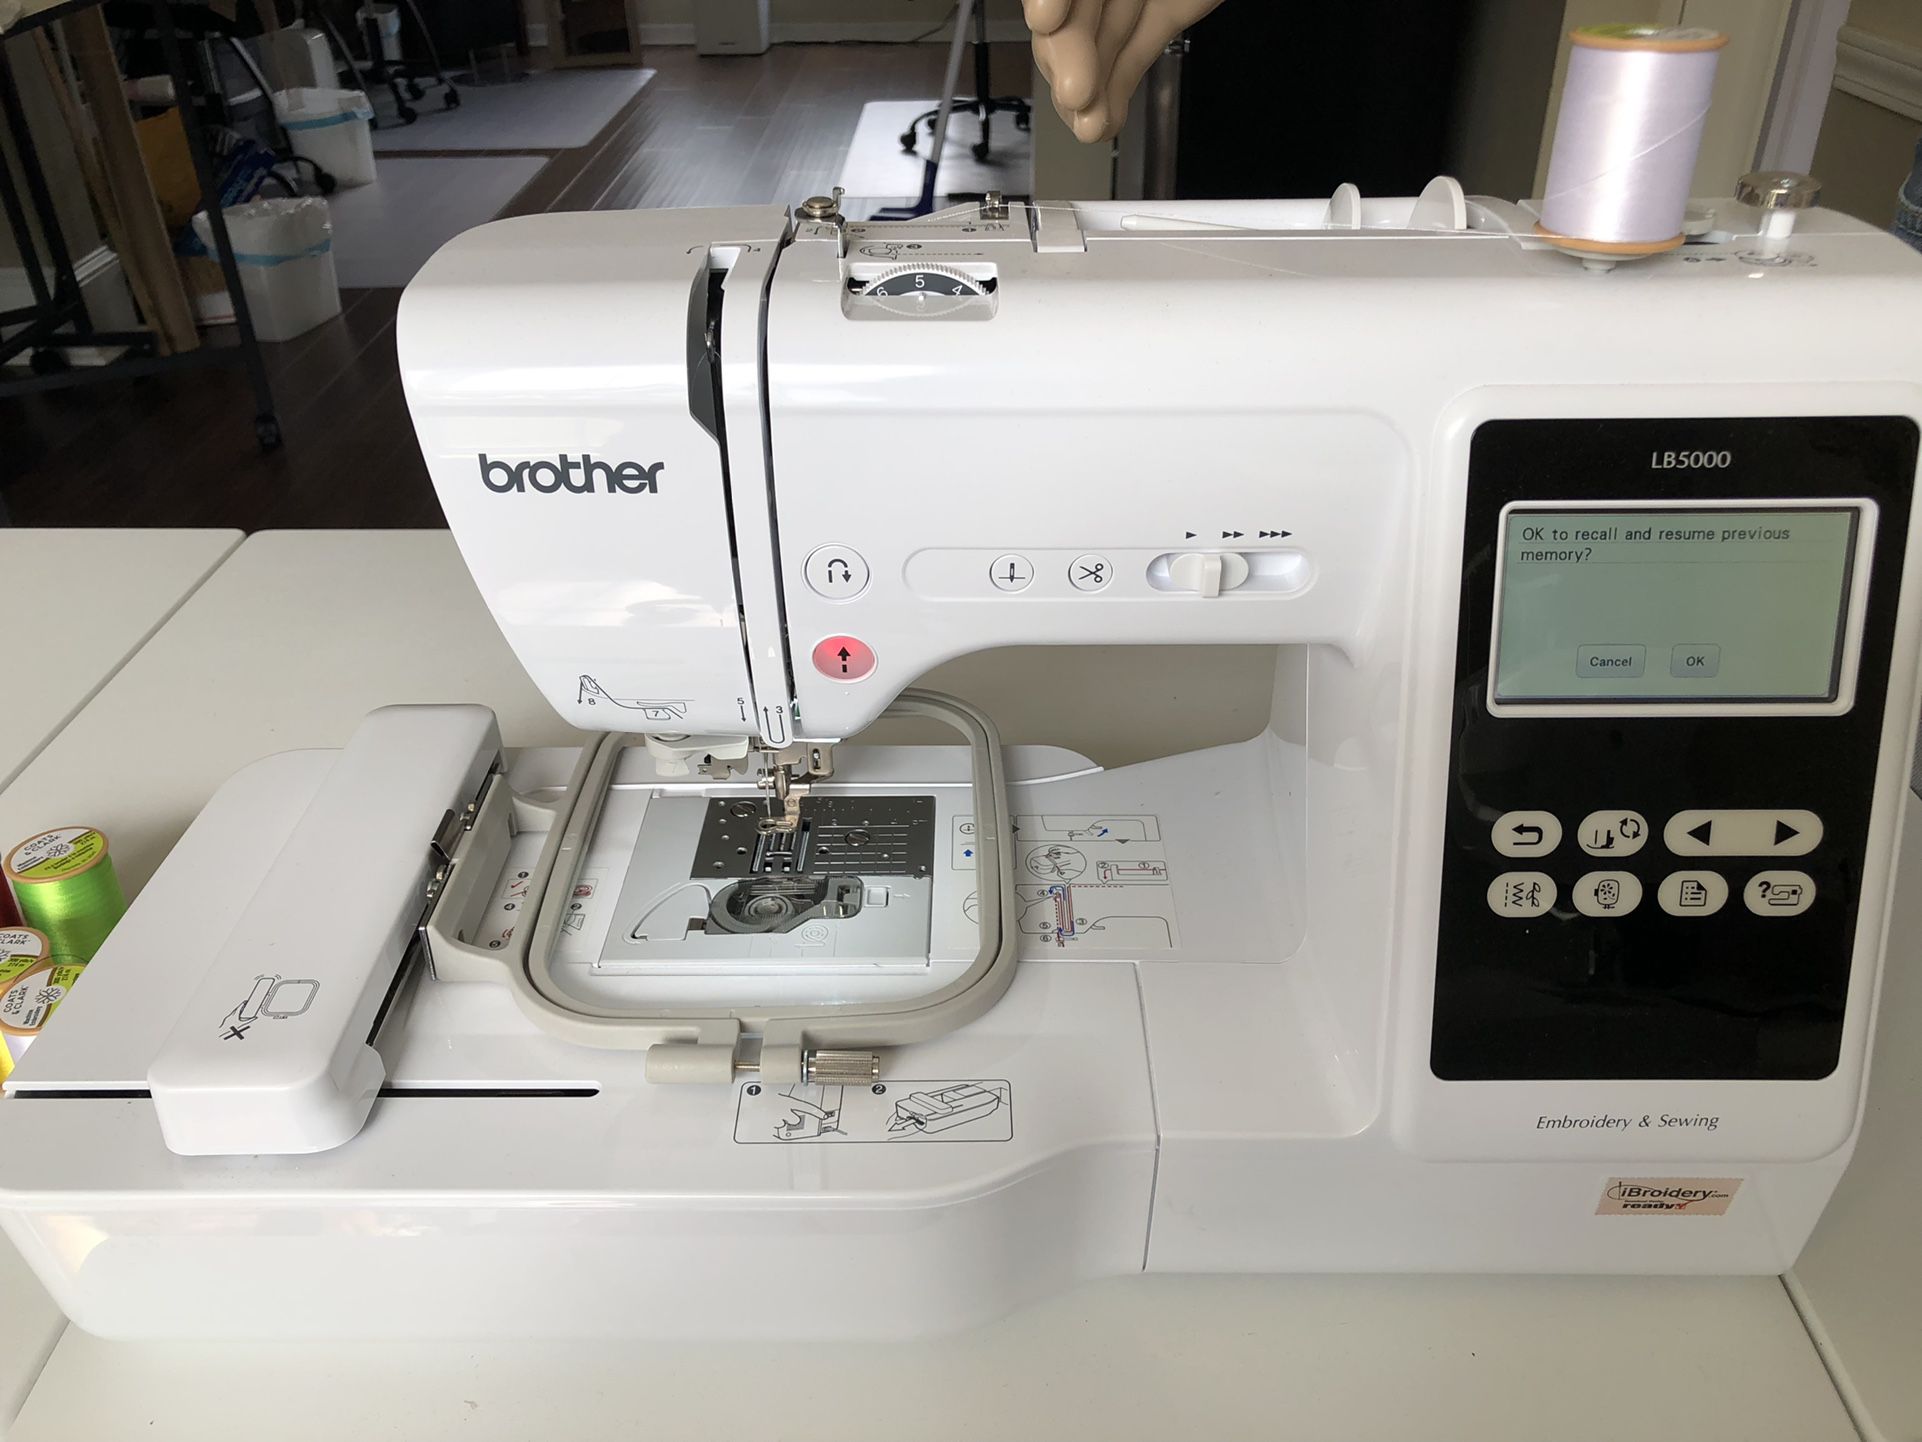 Brother LB5000 Sewing and Embrodery Machine